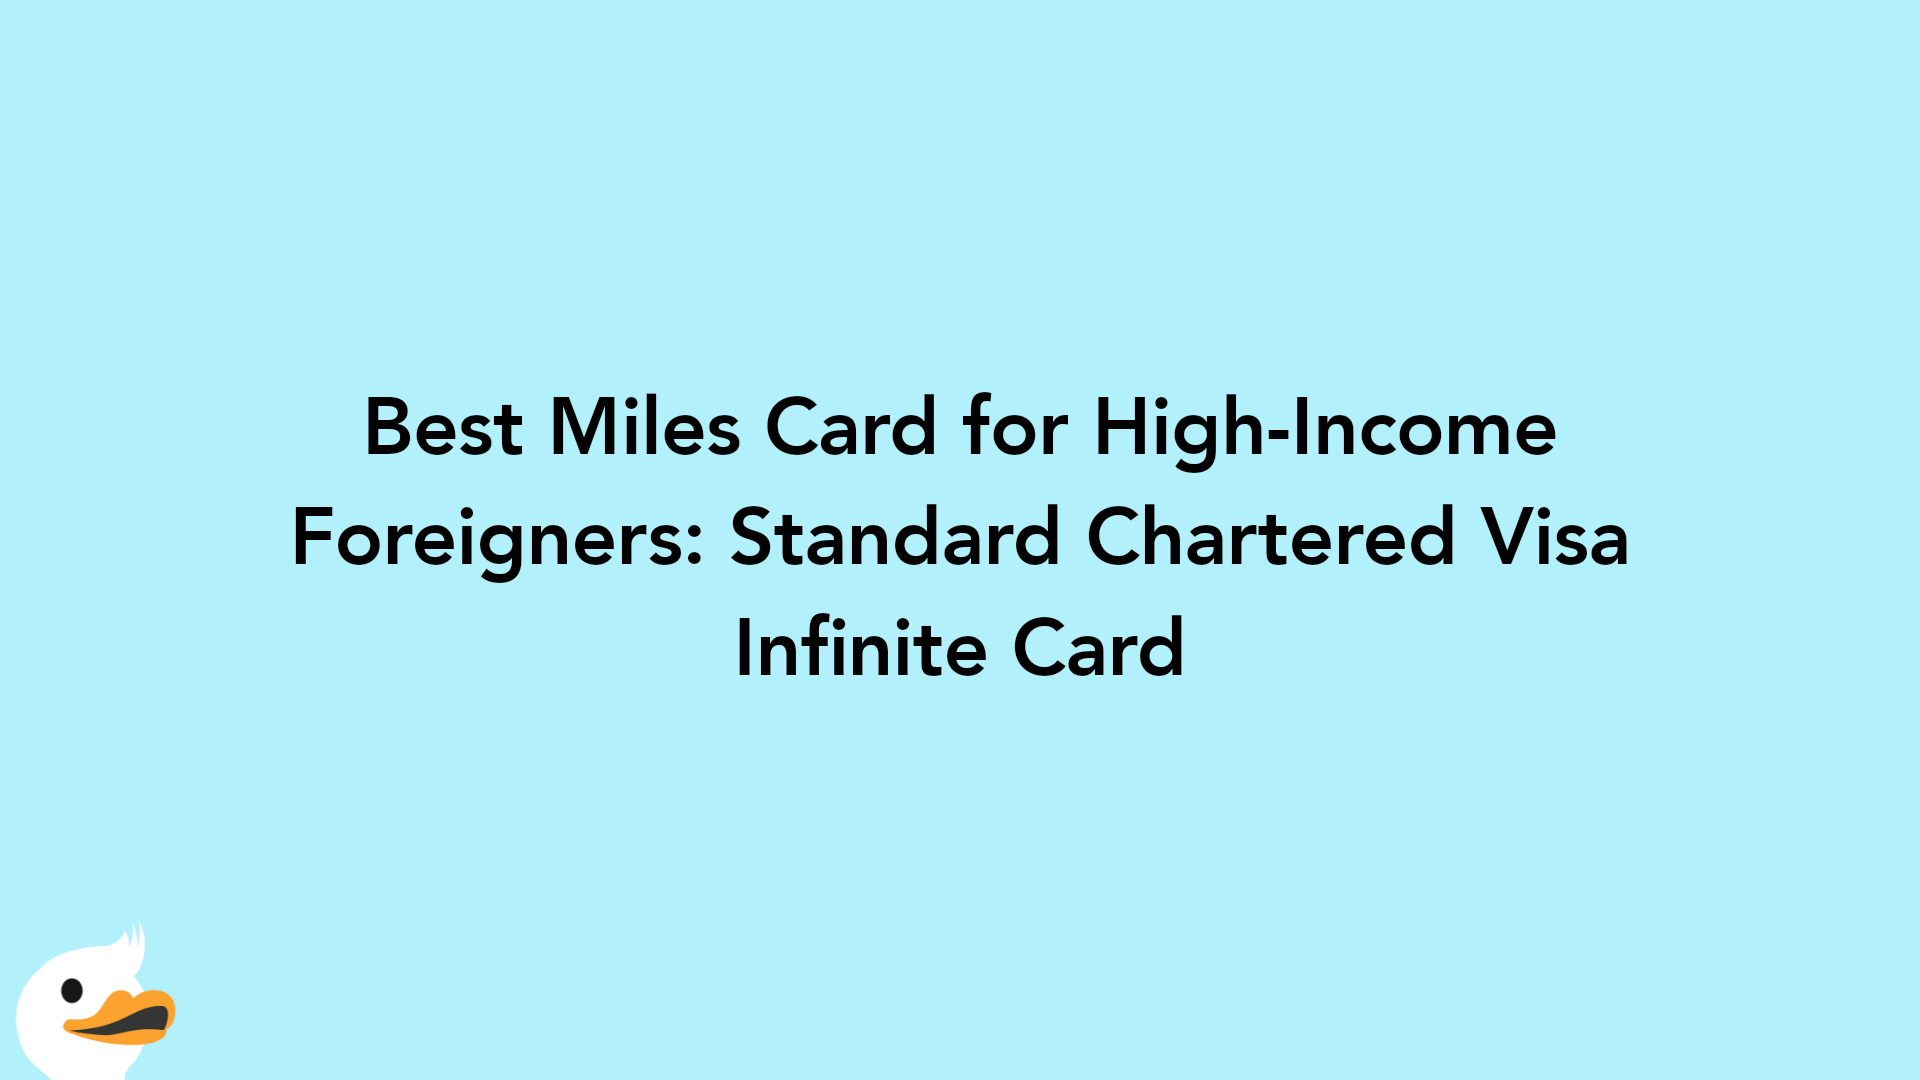 Best Miles Card for High-Income Foreigners: Standard Chartered Visa Infinite Card